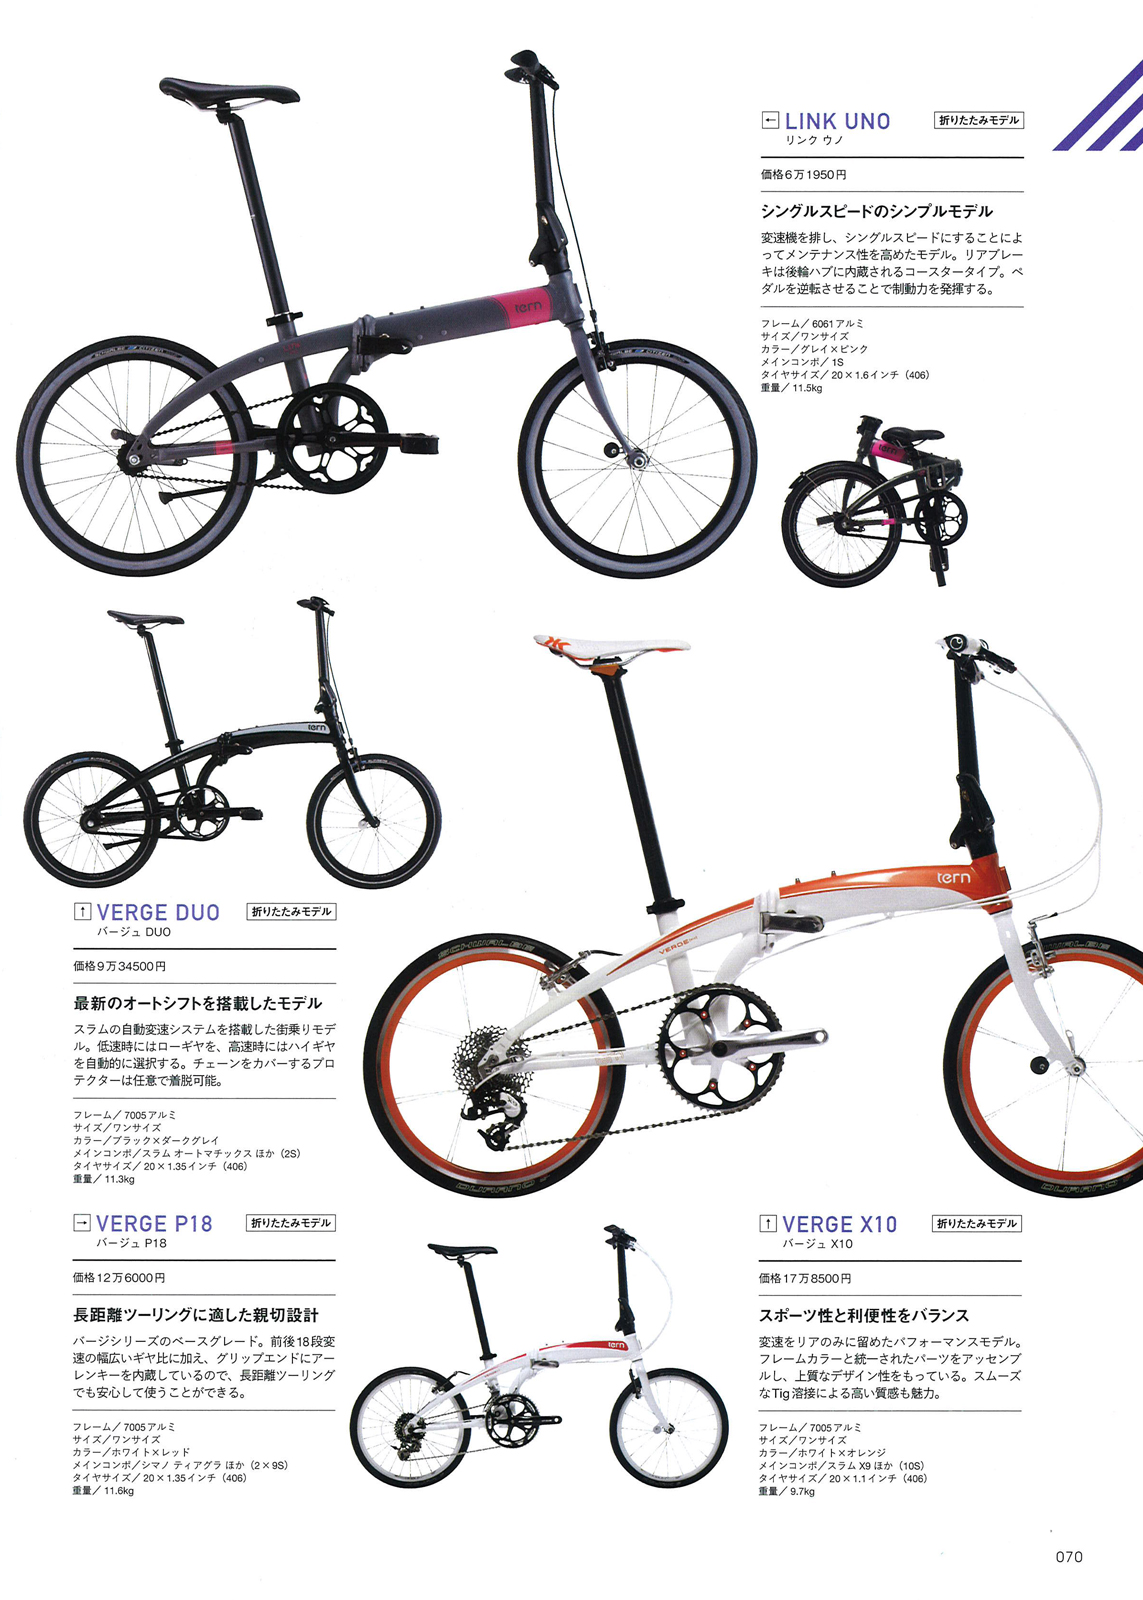 Tern Bicycles Japan Official Blog: 2012.01